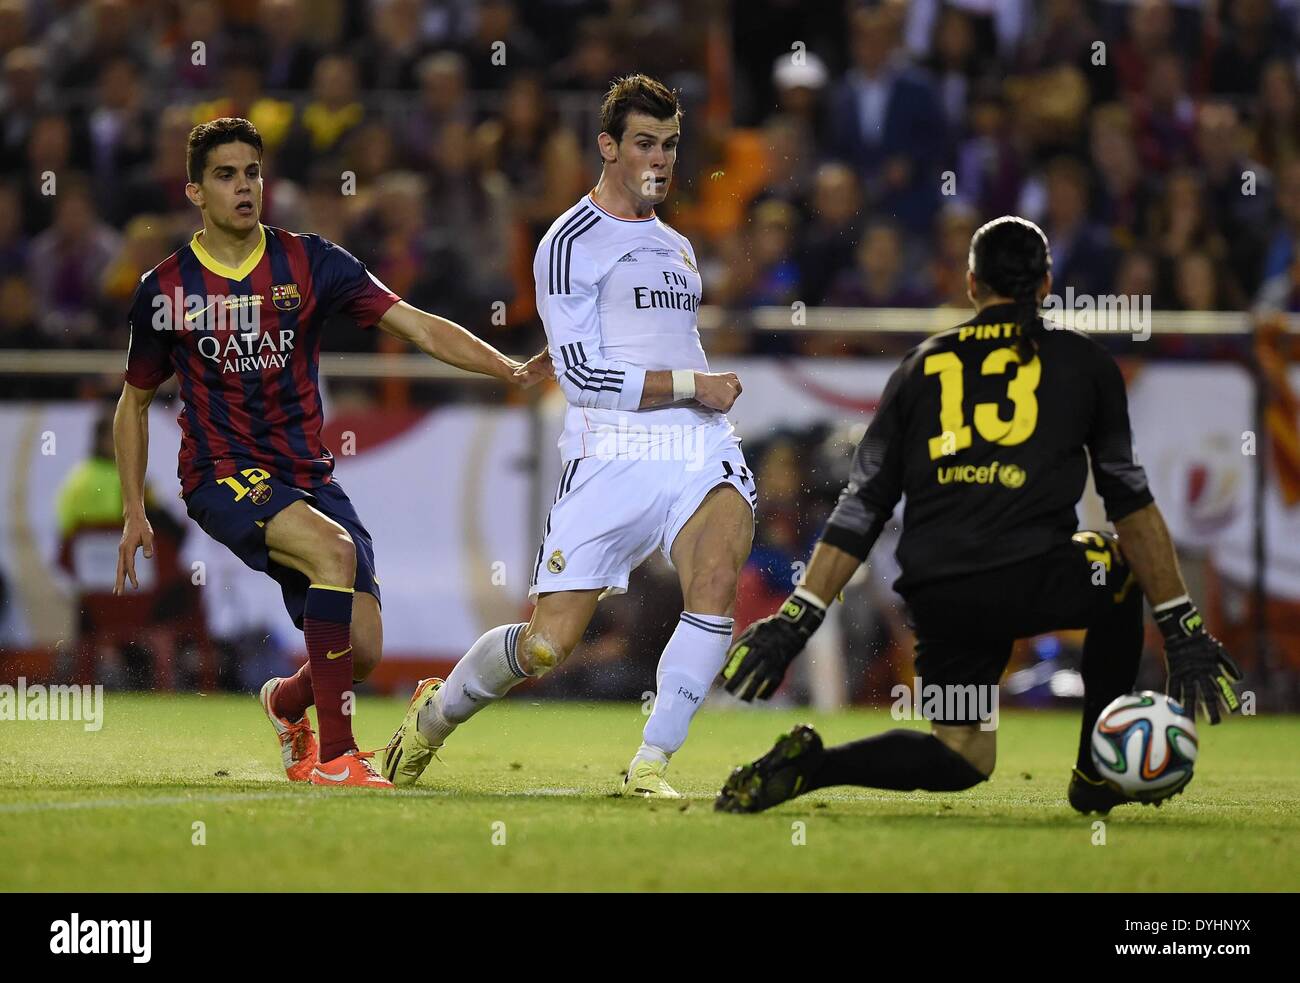 Mestalla, Valencia, Spain. 16th Apr, 2014. Copa Del Rey Cup final.  Barcelona versus Real Madrid. Gareth Bale (Real Madrid) scores the goal for  1-2 past keeper Jose Pinto (Barca) and Marc Bartra (